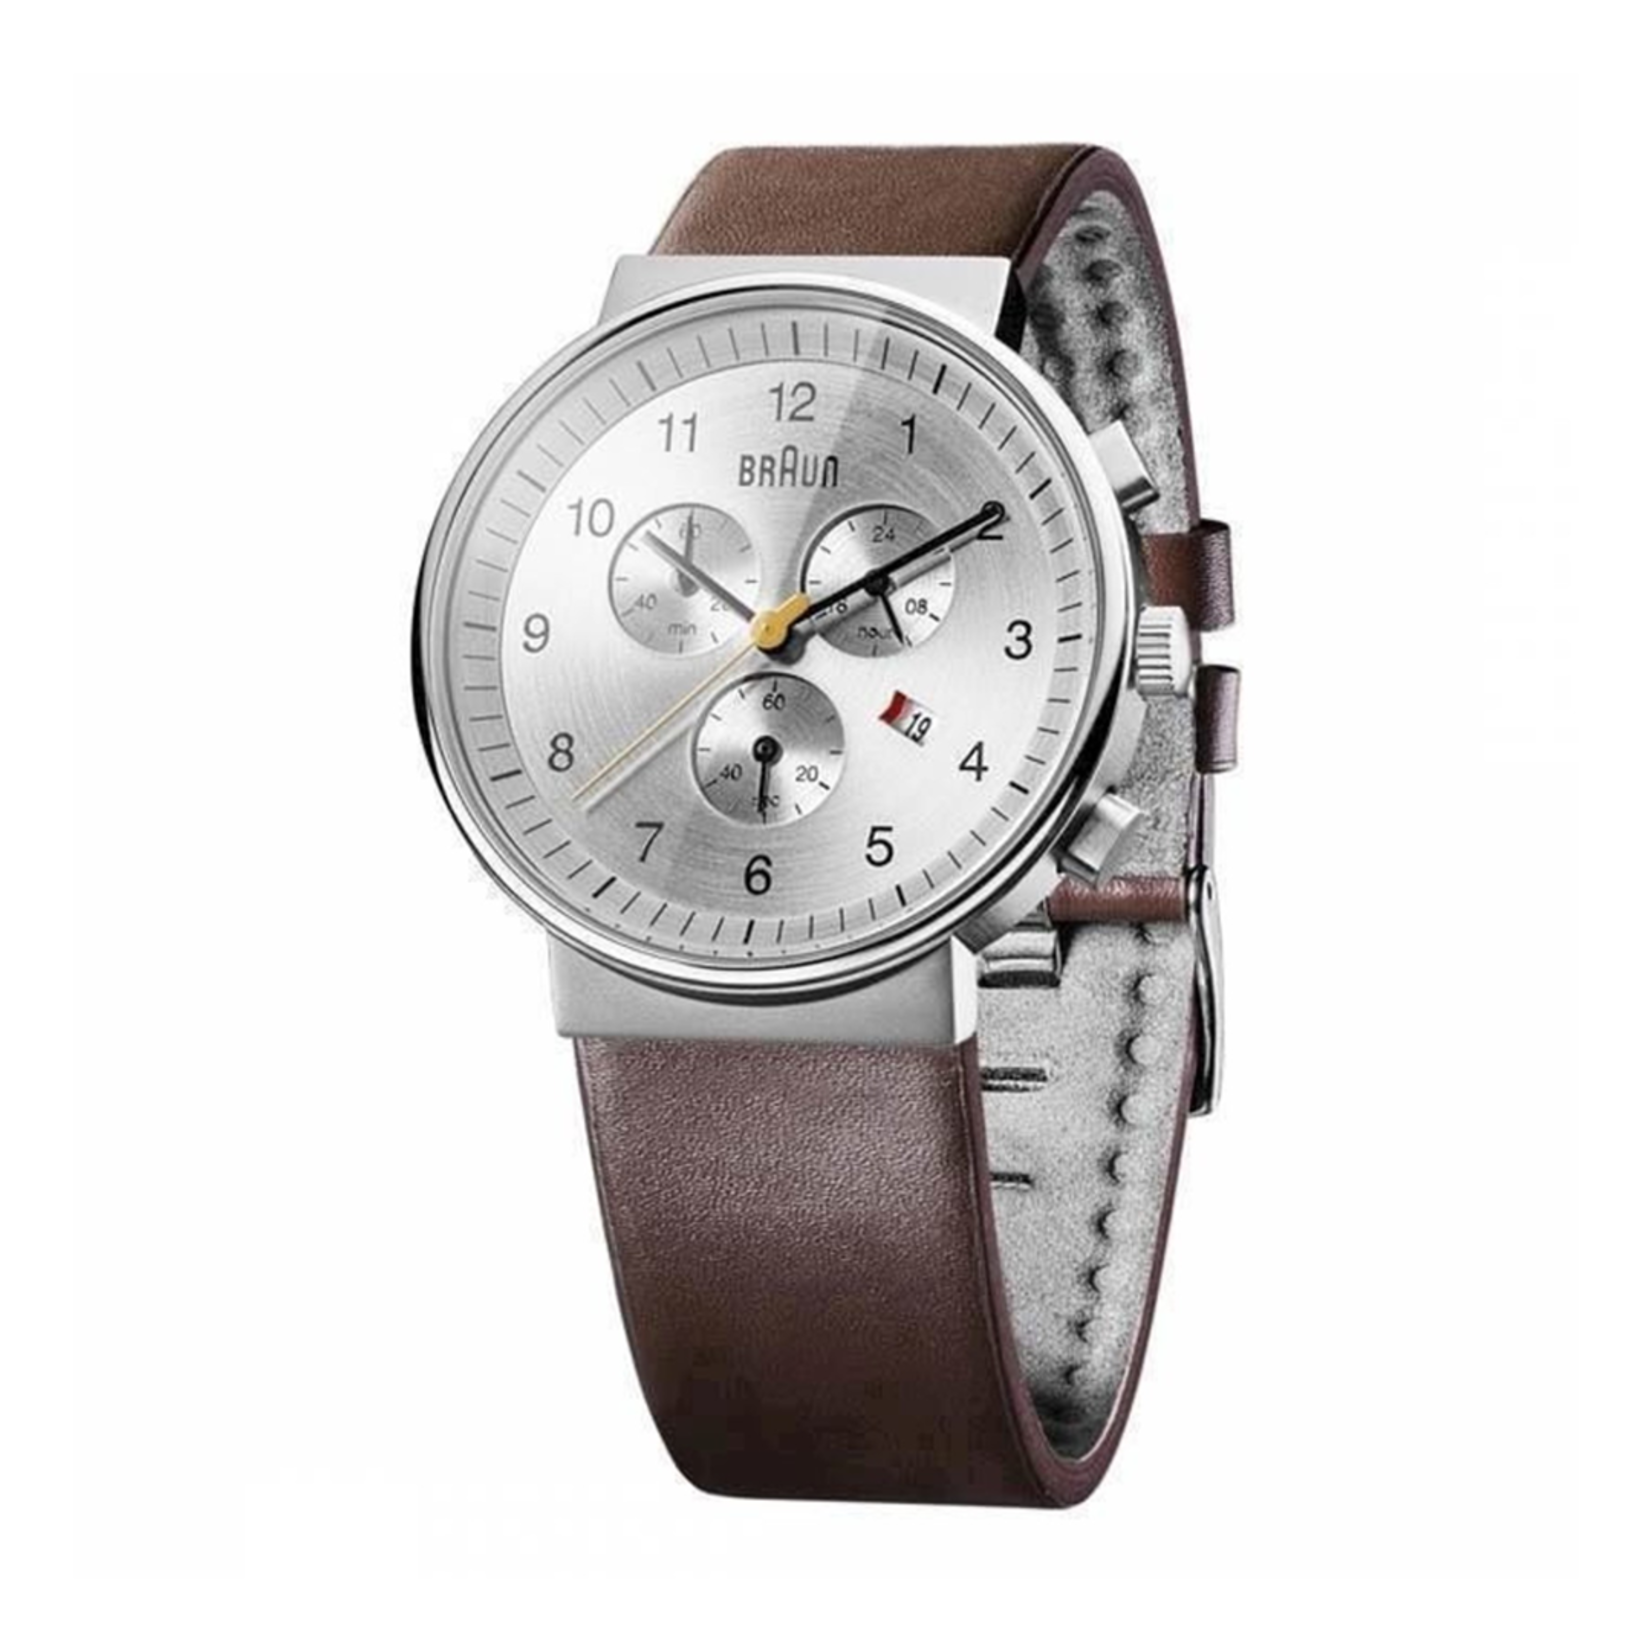 Braun Gents Classic Chronograph Watch with Brown Leather Strap